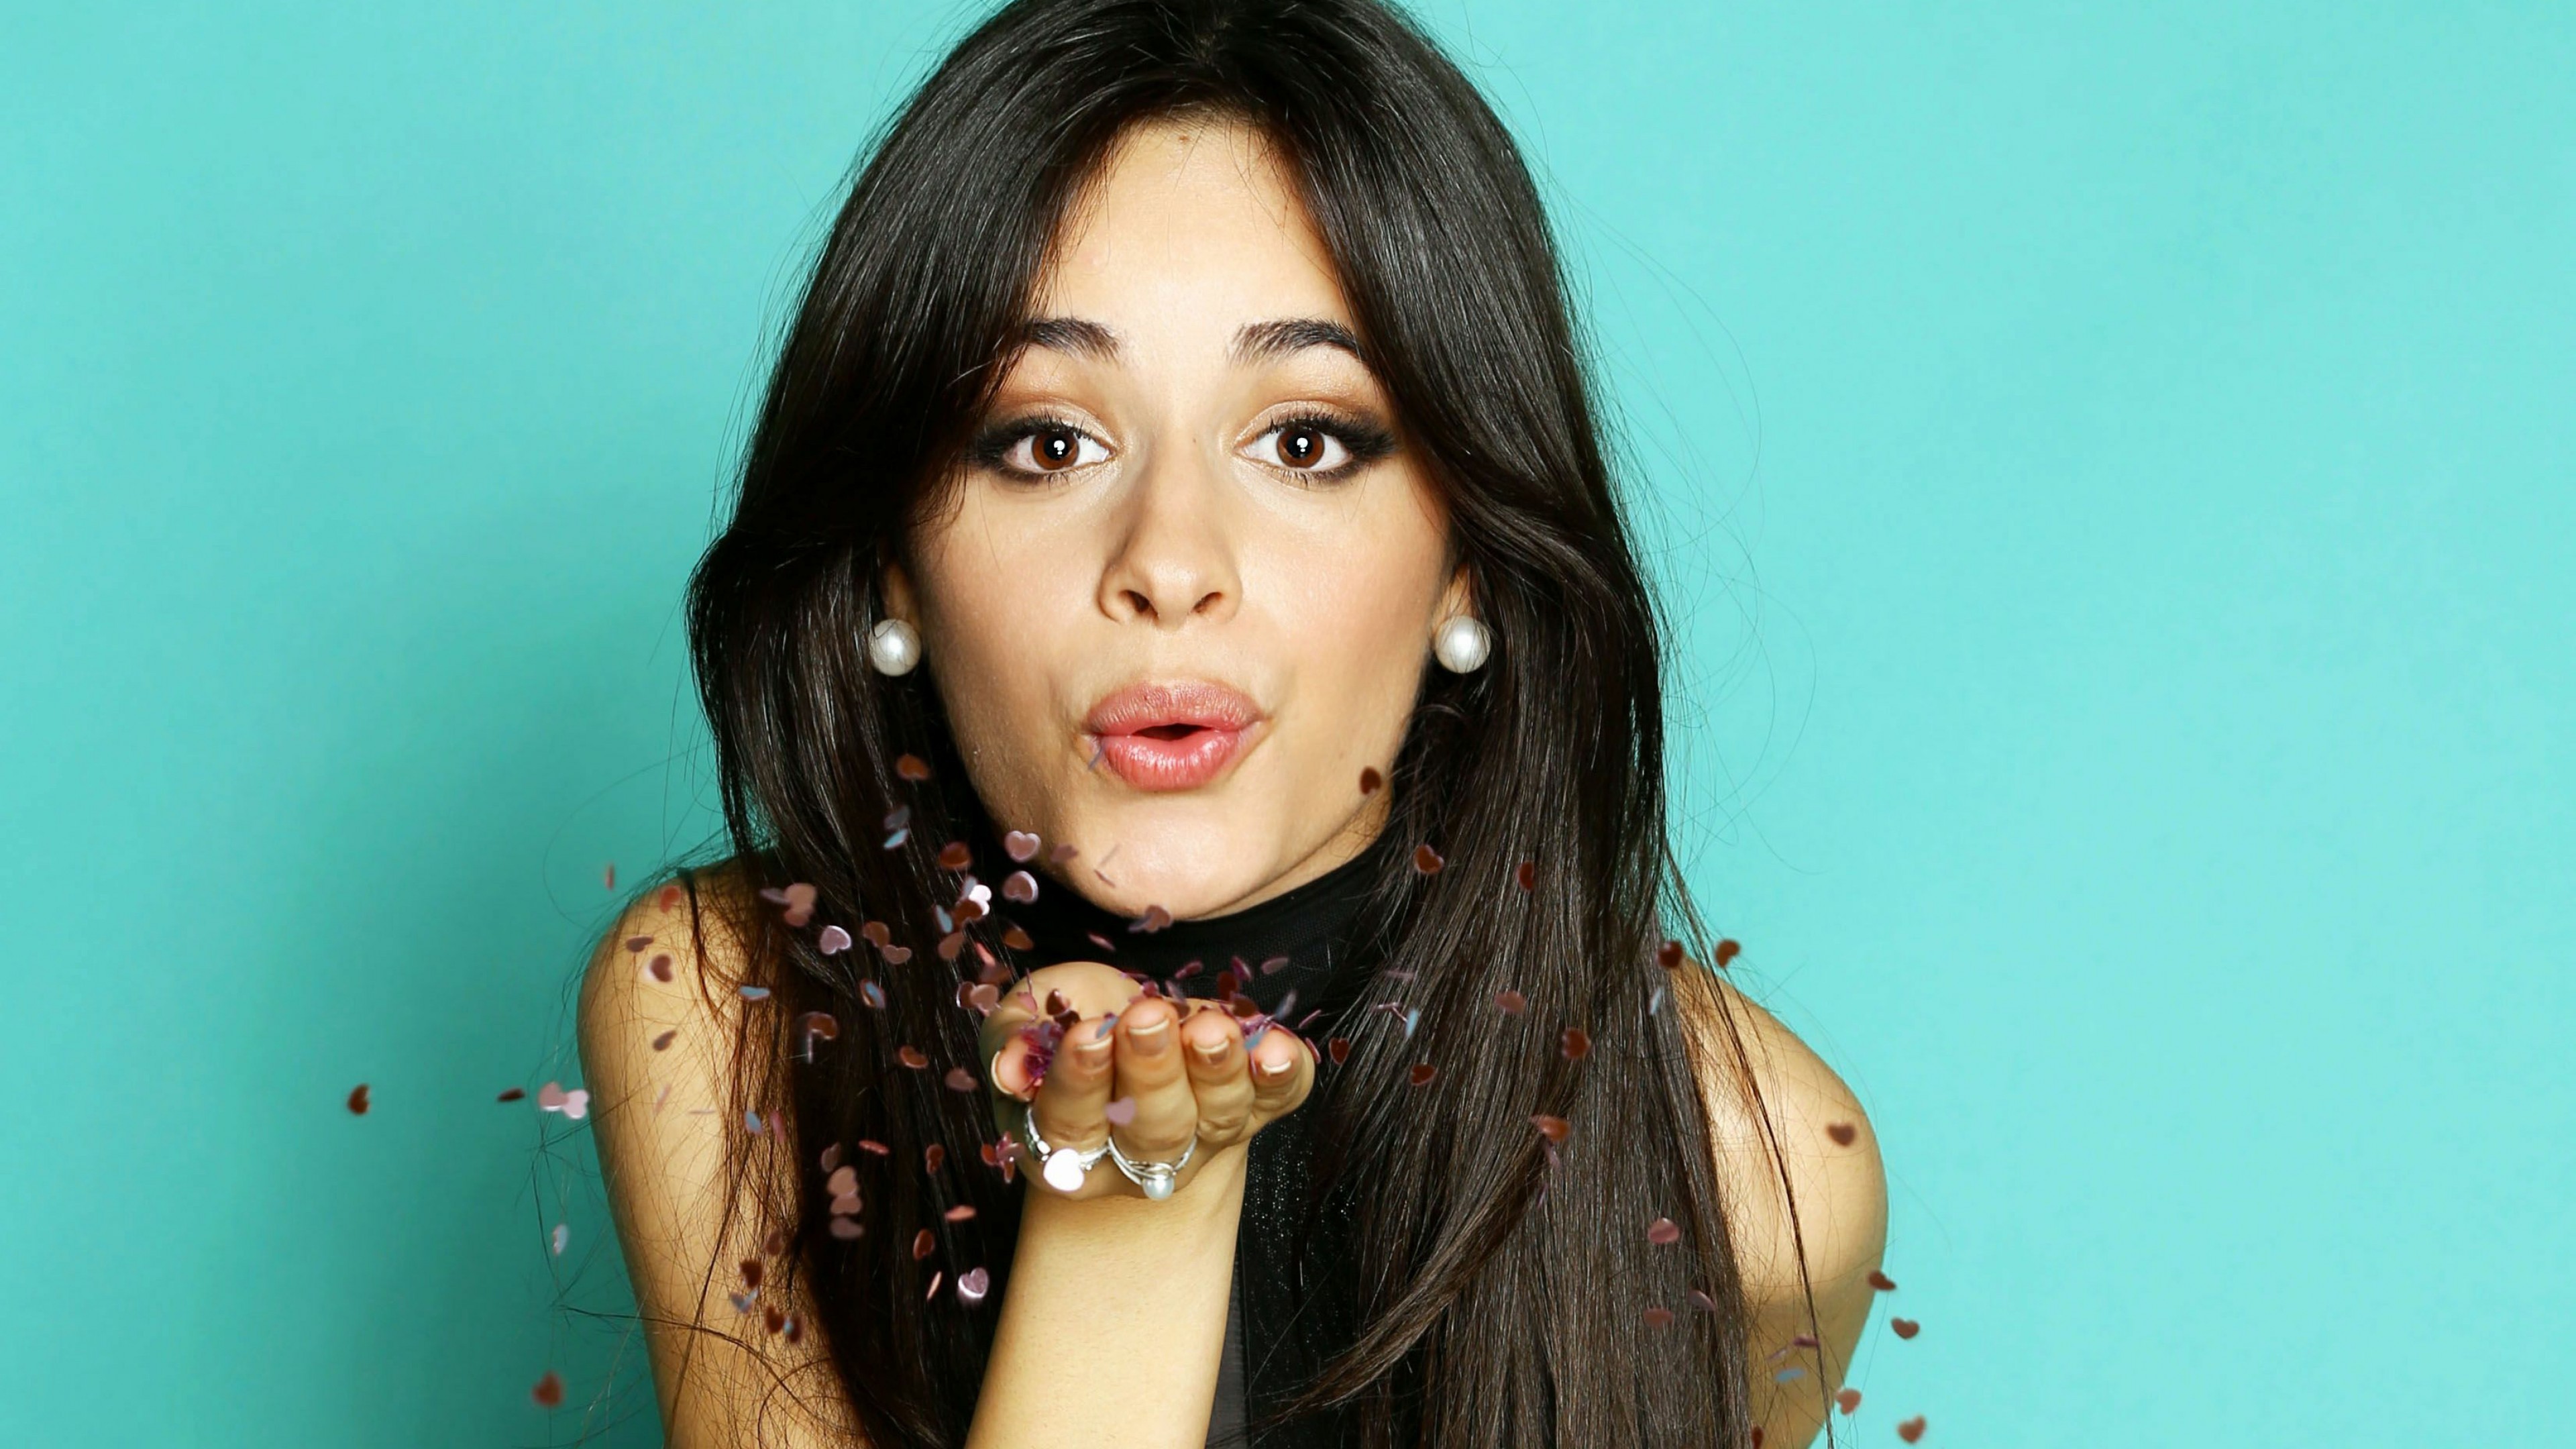 Wallpaper Camila Cabello Camila Hair Beauty Hairstyle Background   Download Free Image